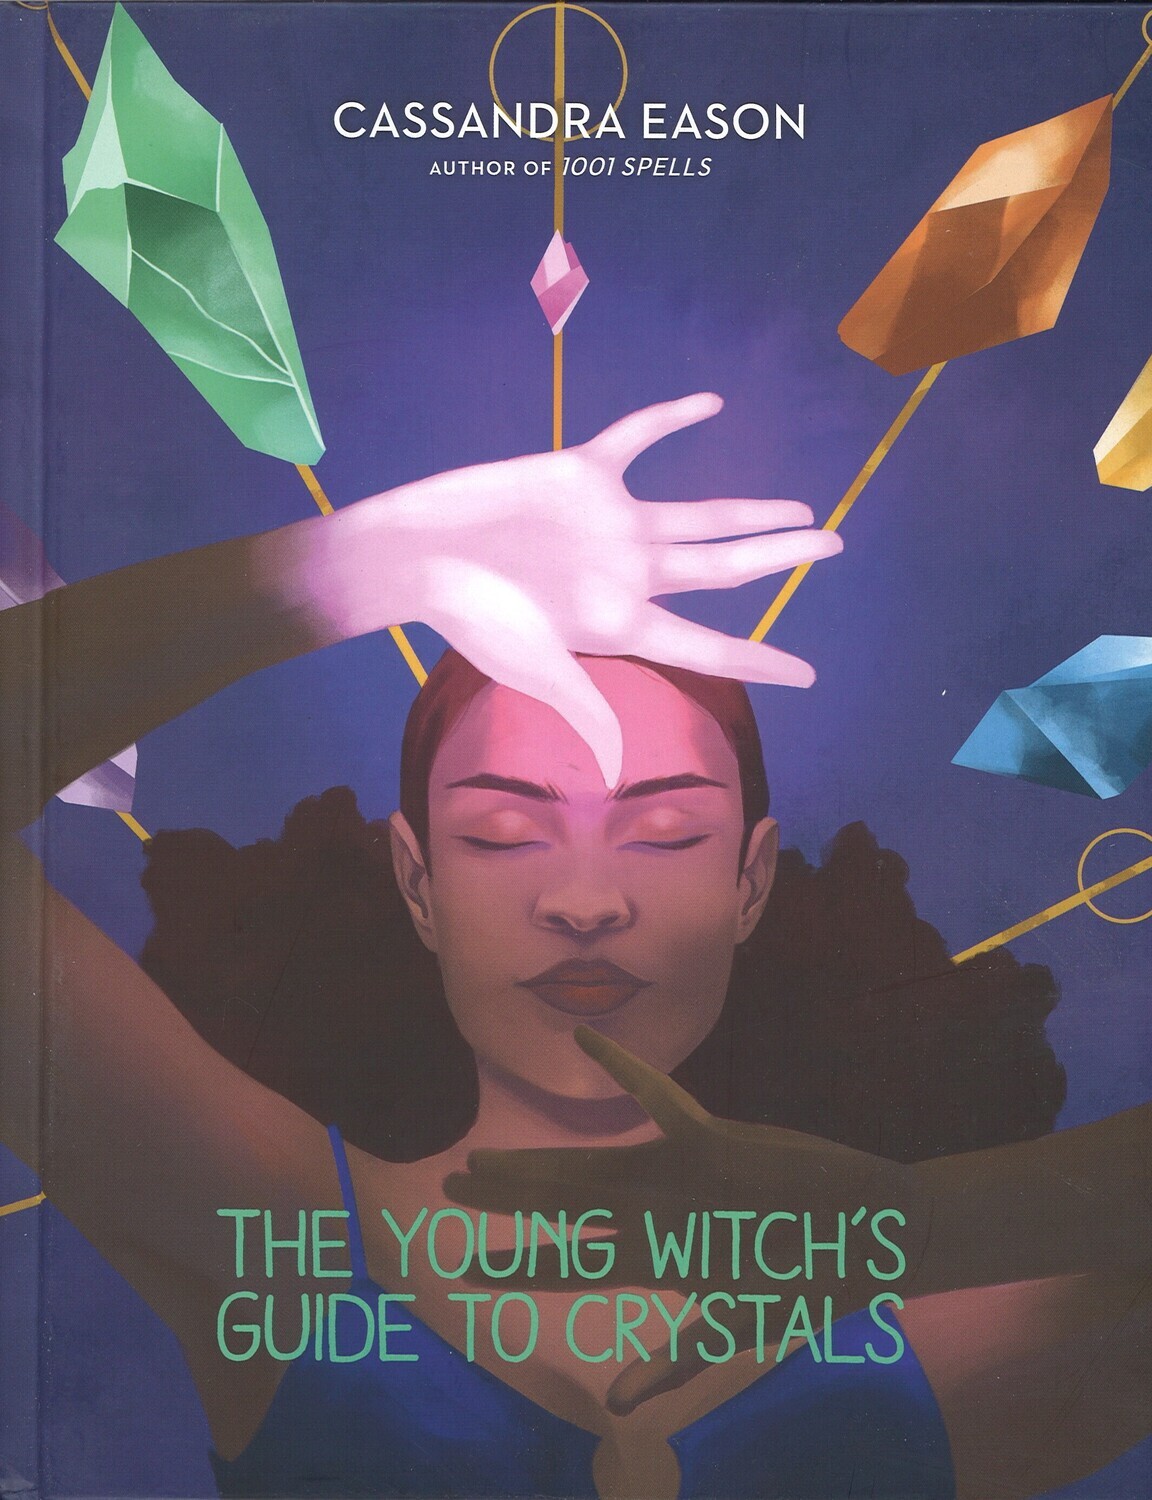 The Young Witch's Guide To Crystals